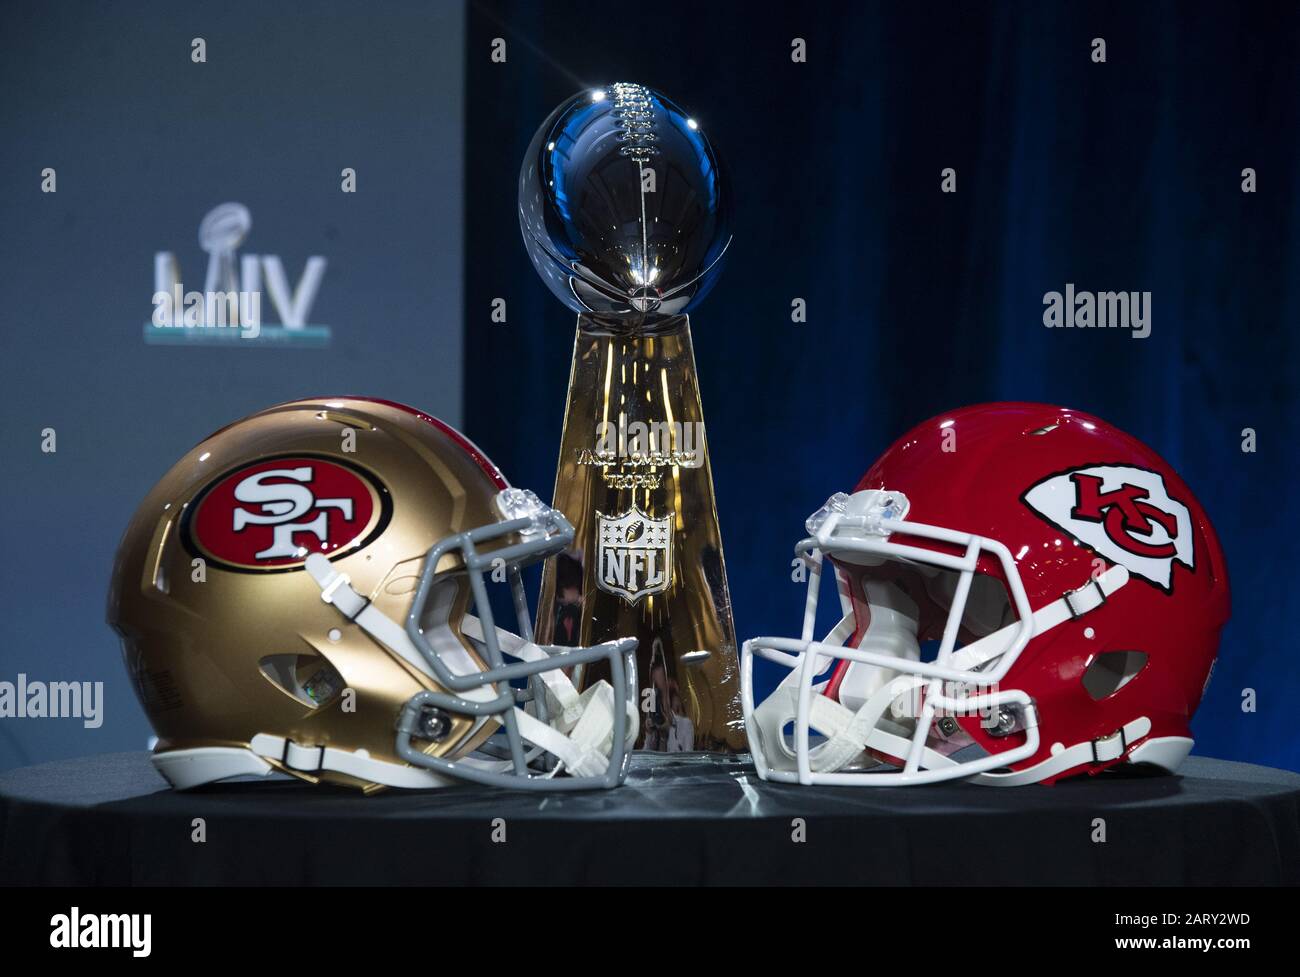 Miami, United States. 29th Jan, 2020. The Vince Lombardi trophy is  displayed alongside helmets for the San Francisco 49ers and the Kansas City  Chiefs duding Super Bowl week in Miami on Wednesday,